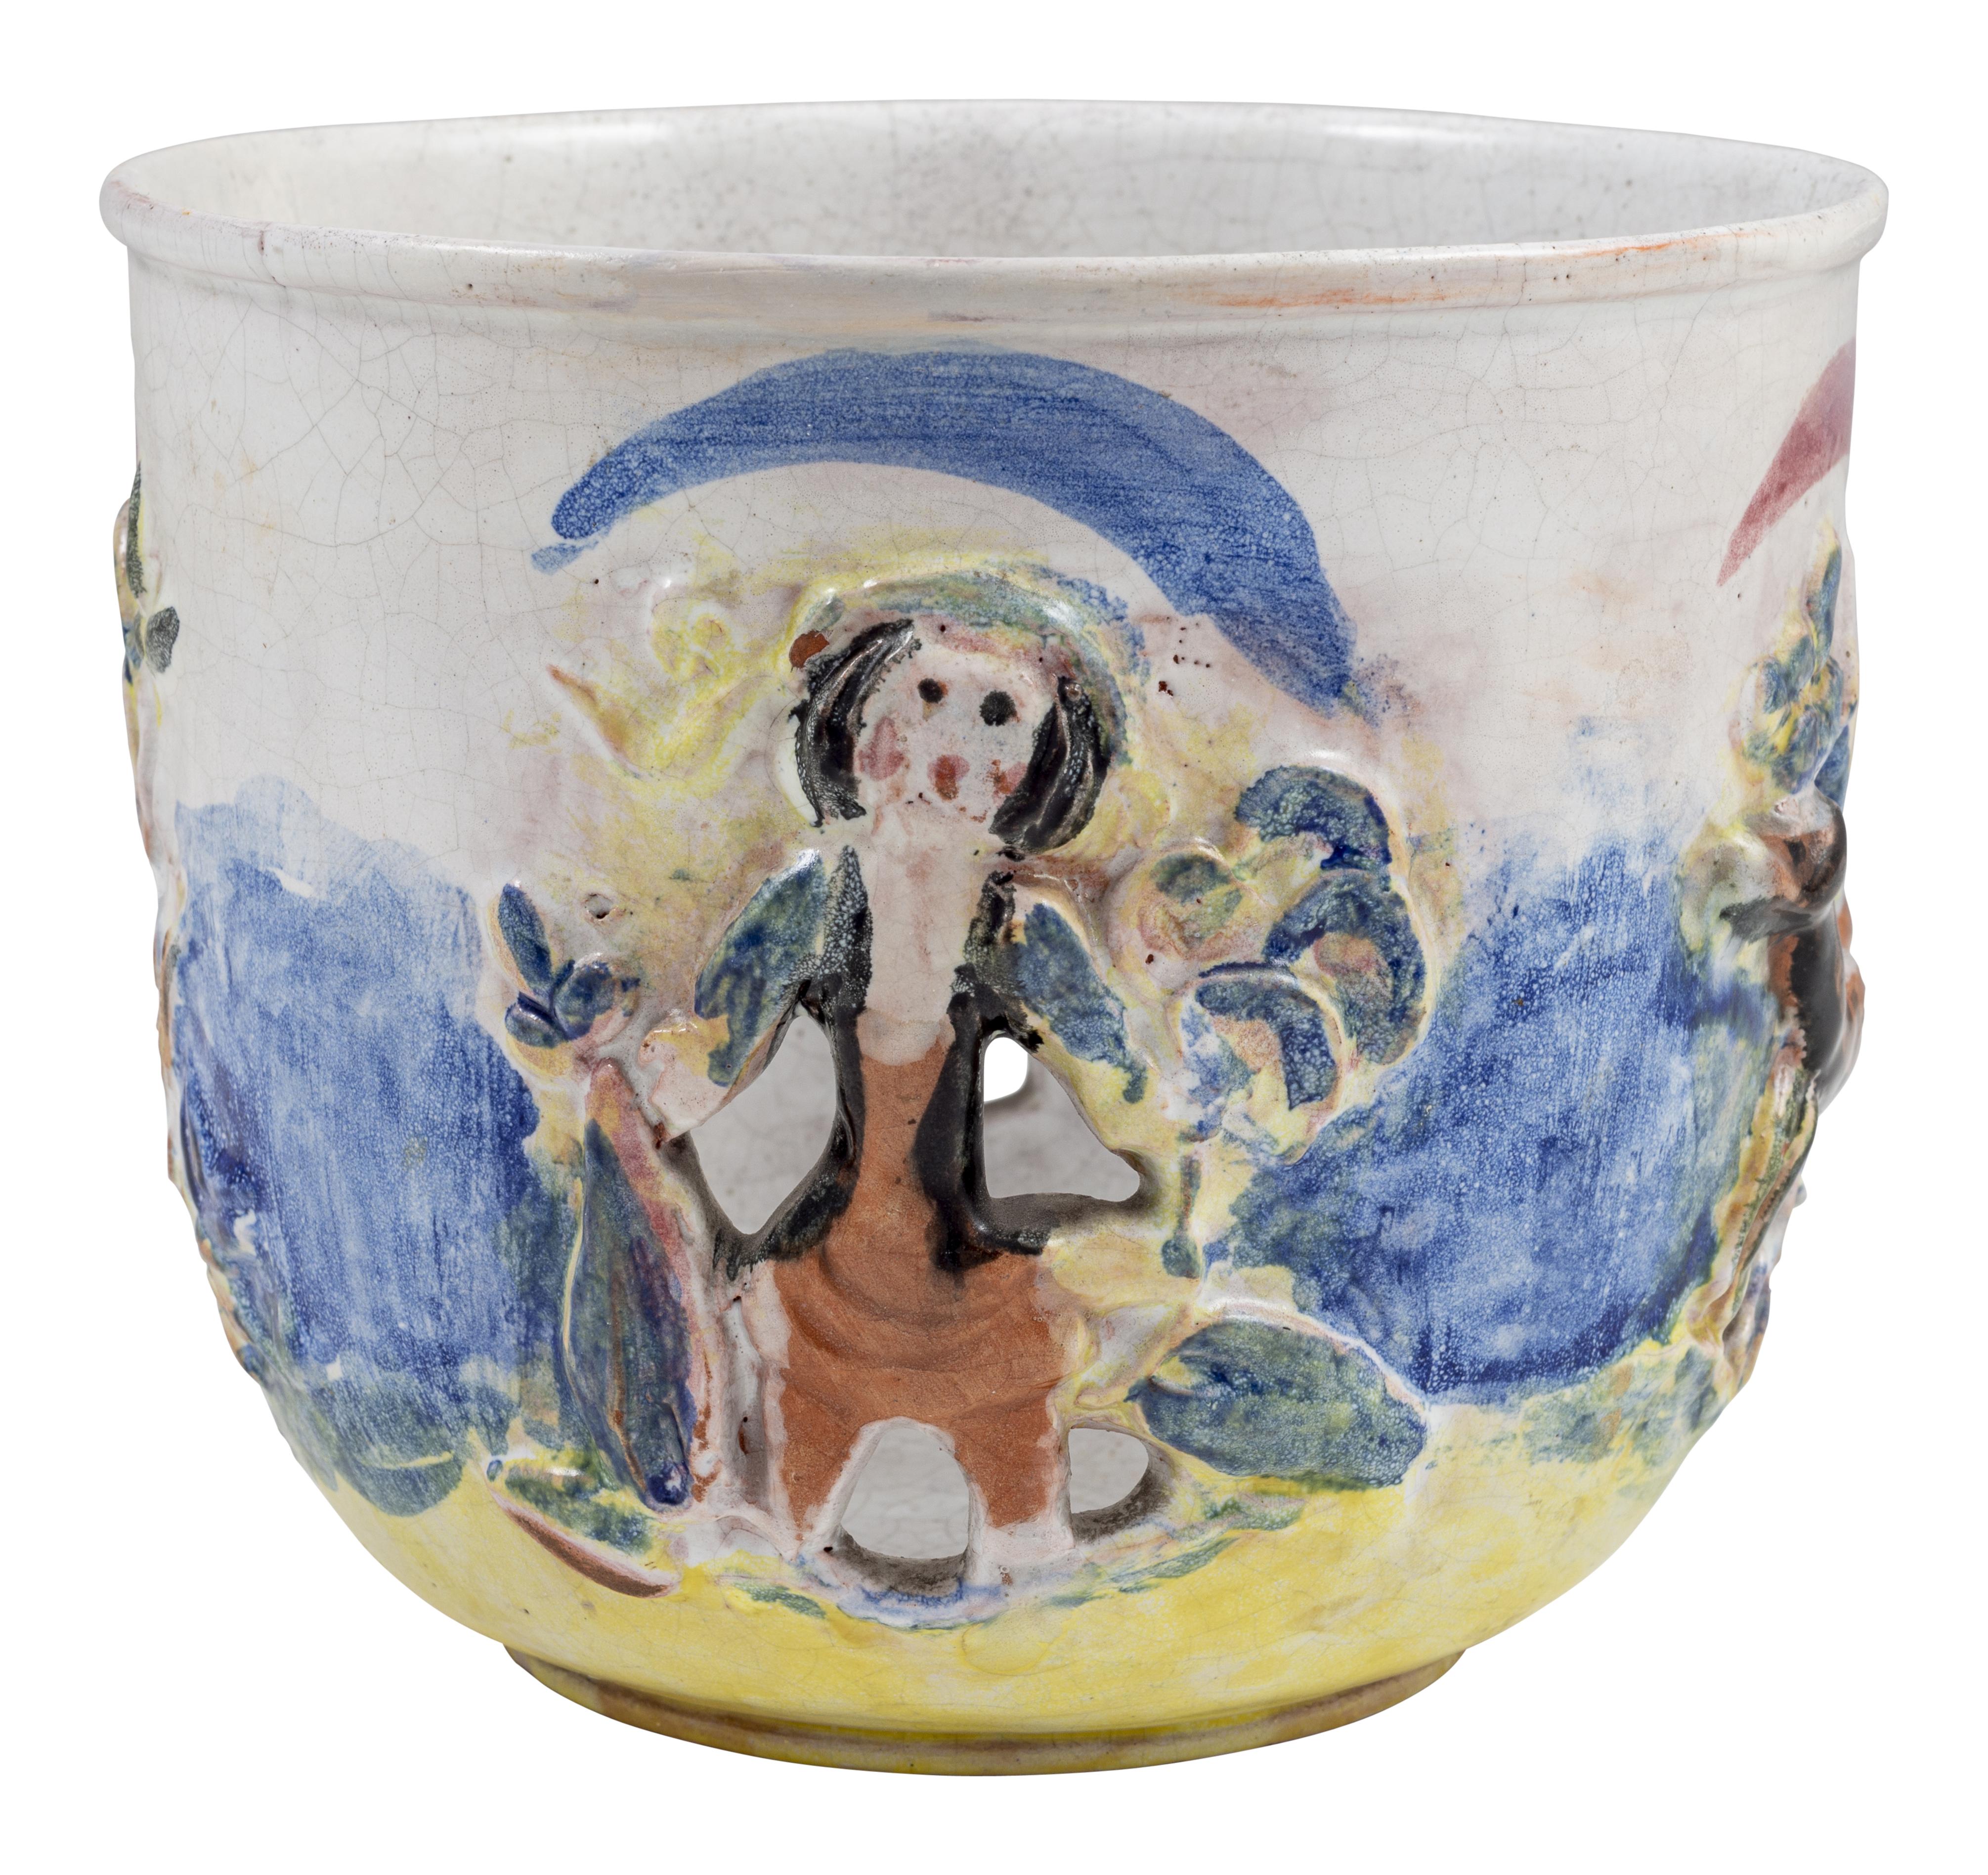 Cachepot Ceramics Colorfully Glazed Austrian Jugendstil Susi Singer circa 1928 Wiener Werkstätte

The Wiener Werkstätte was not only artistically very progressive, but also on a societal level, as many female artists worked there. Especially in the